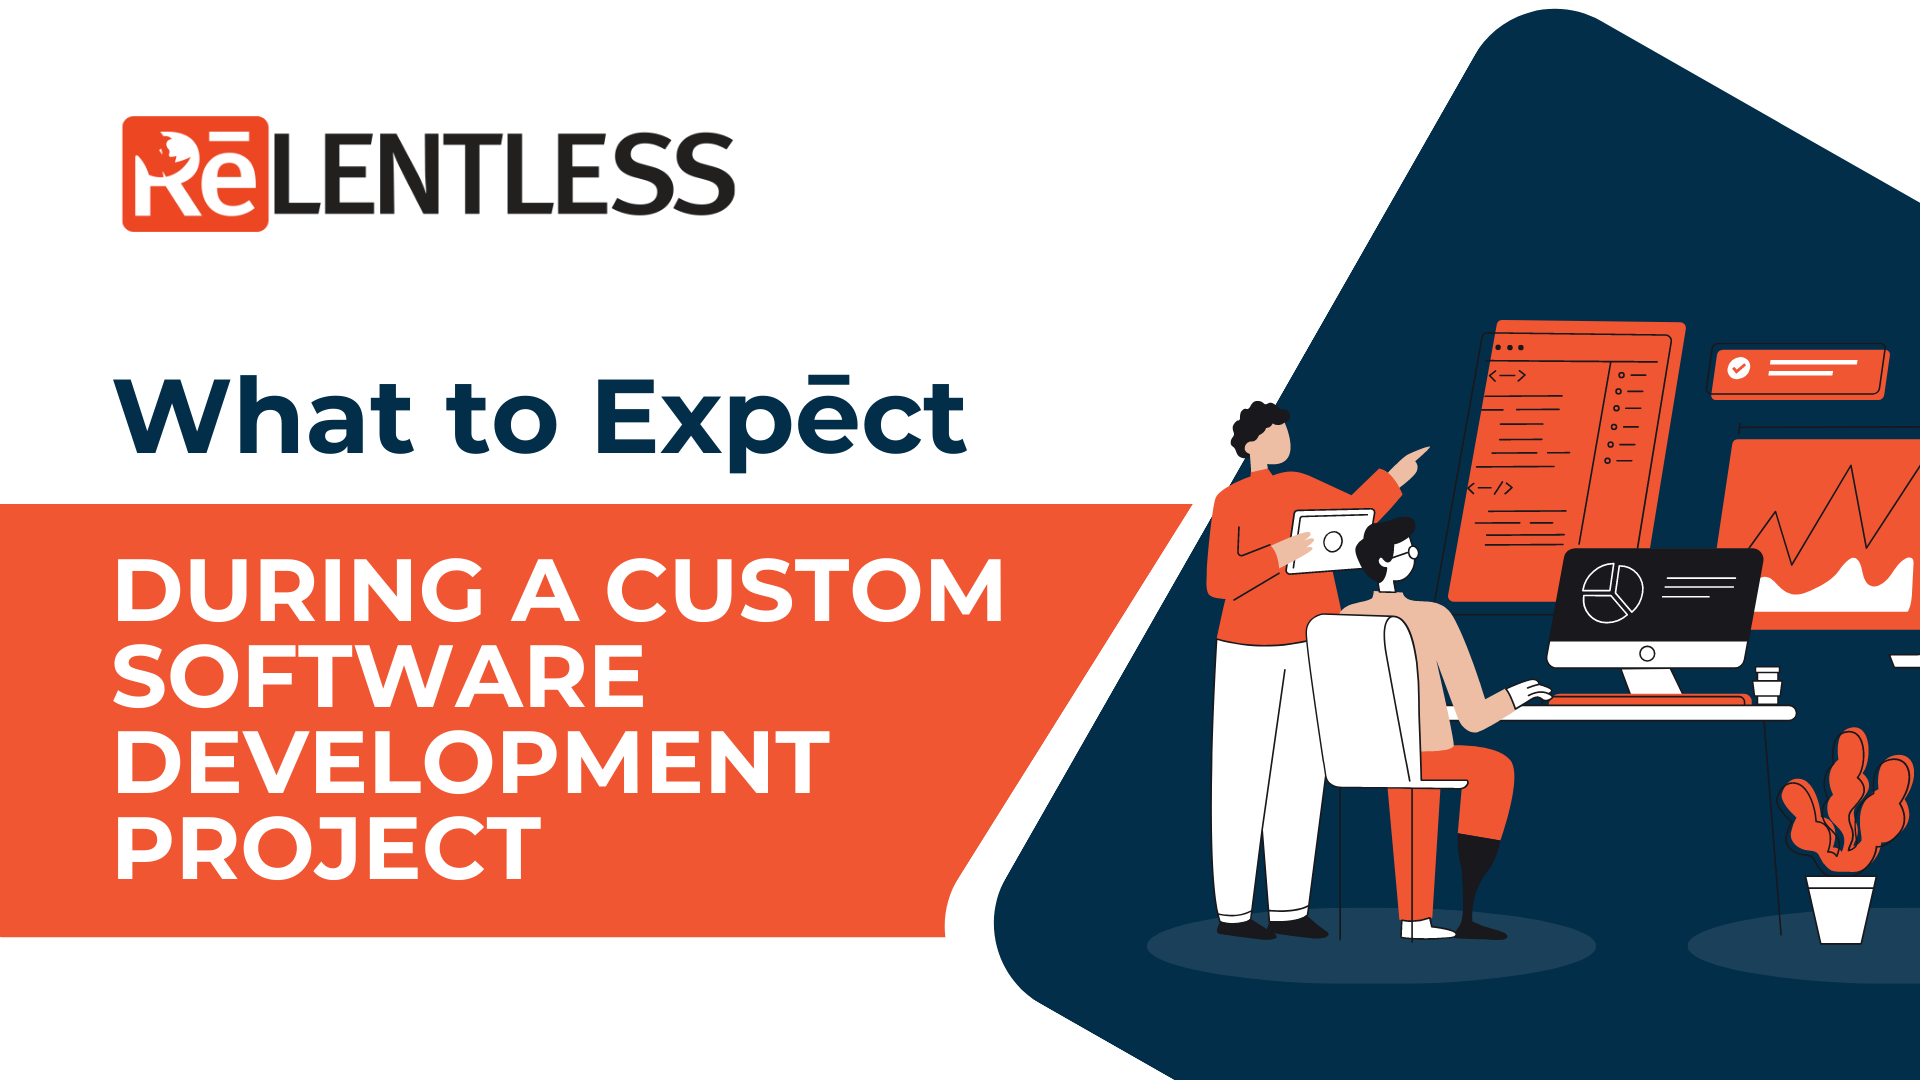 What to Expect During a Custom Software Development Project